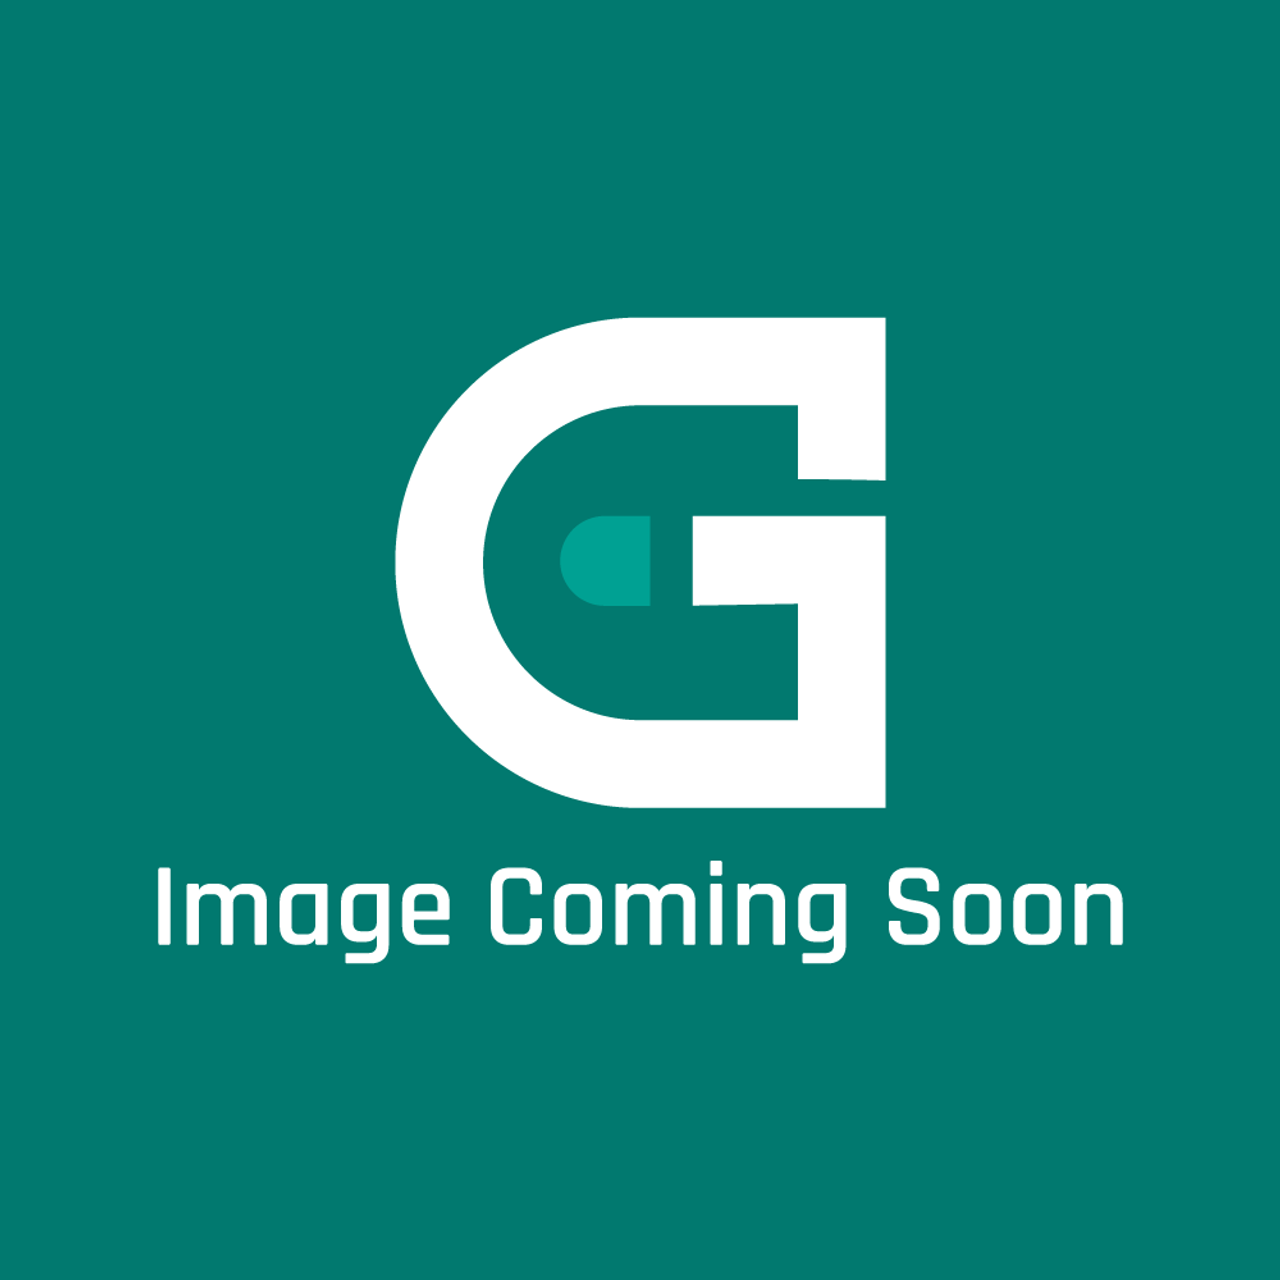 GE Appliances WJ01X10349 - Room Air Cond. Installation Hardware - Image Coming Soon!